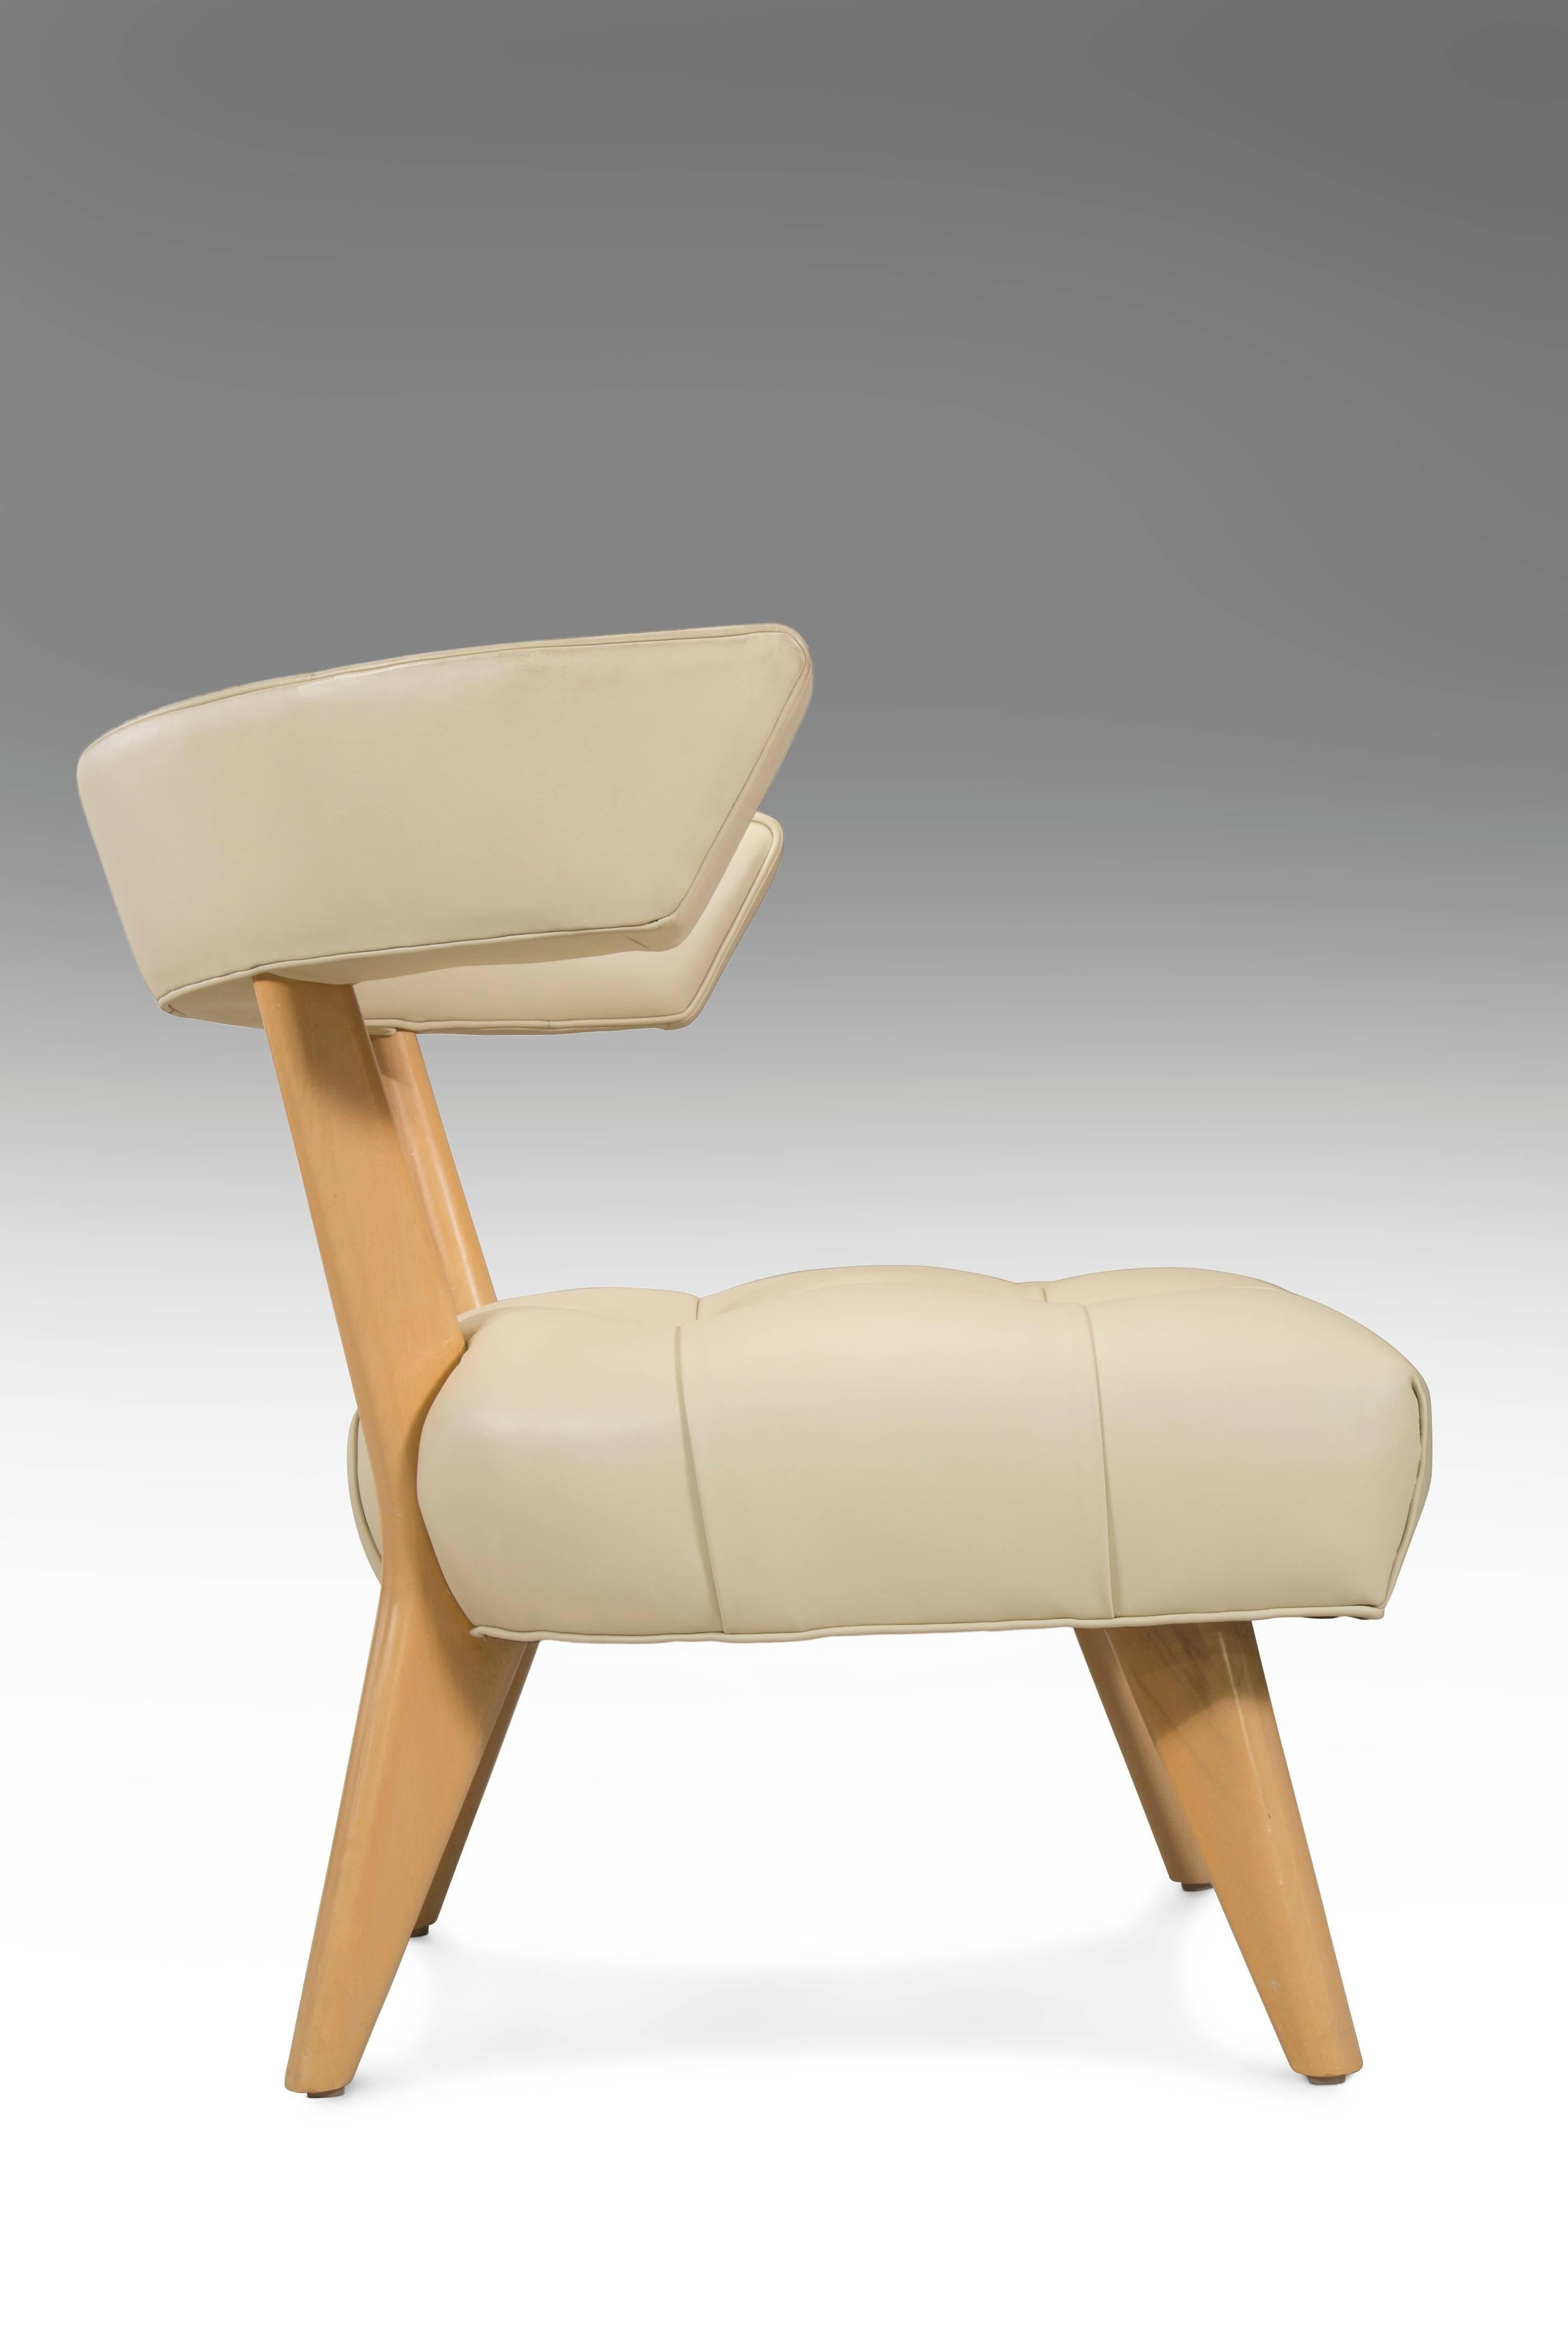 Billy Haines, Pair of Blonde Glazed Wood and Ivory Upholstered Hostess Chairs In Good Condition For Sale In New York, NY